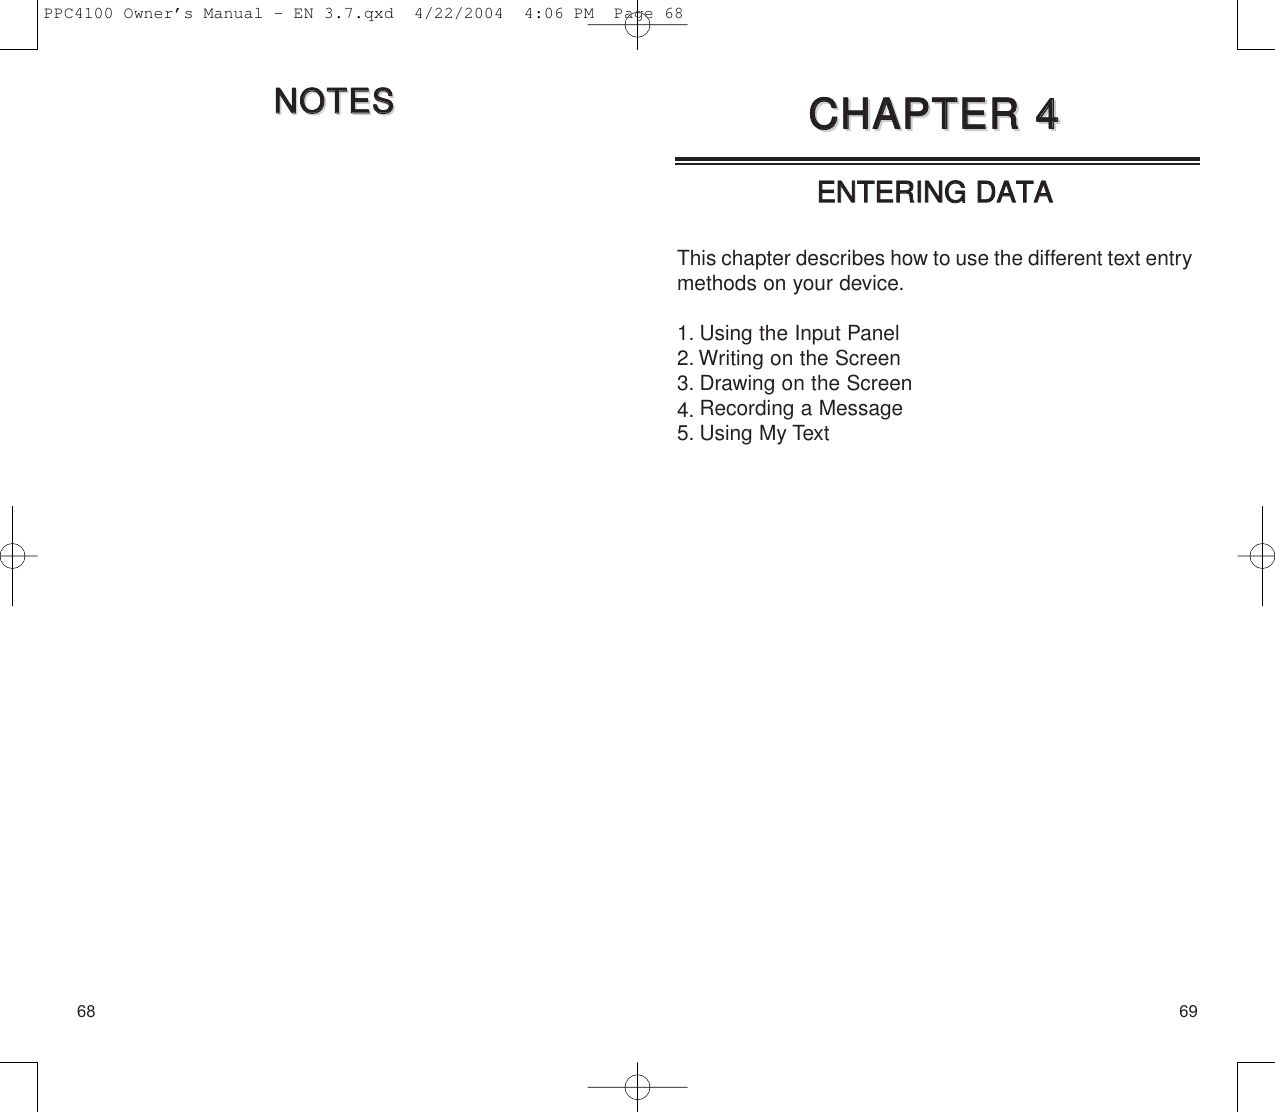 69EENNTTEERRIINNGG  DDAATTAAThis chapter describes how to use the different text entrymethods on your device.1. Using the Input Panel2. Writing on the Screen3. Drawing on the Screen4. Recording a Message5. Using My TextCCHHAAPPTTEERR  44CCHHAAPPTTEERR  4468NNOOTTEESSNNOOTTEESSPPC4100 Owner’s Manual - EN 3.7.qxd  4/22/2004  4:06 PM  Page 68